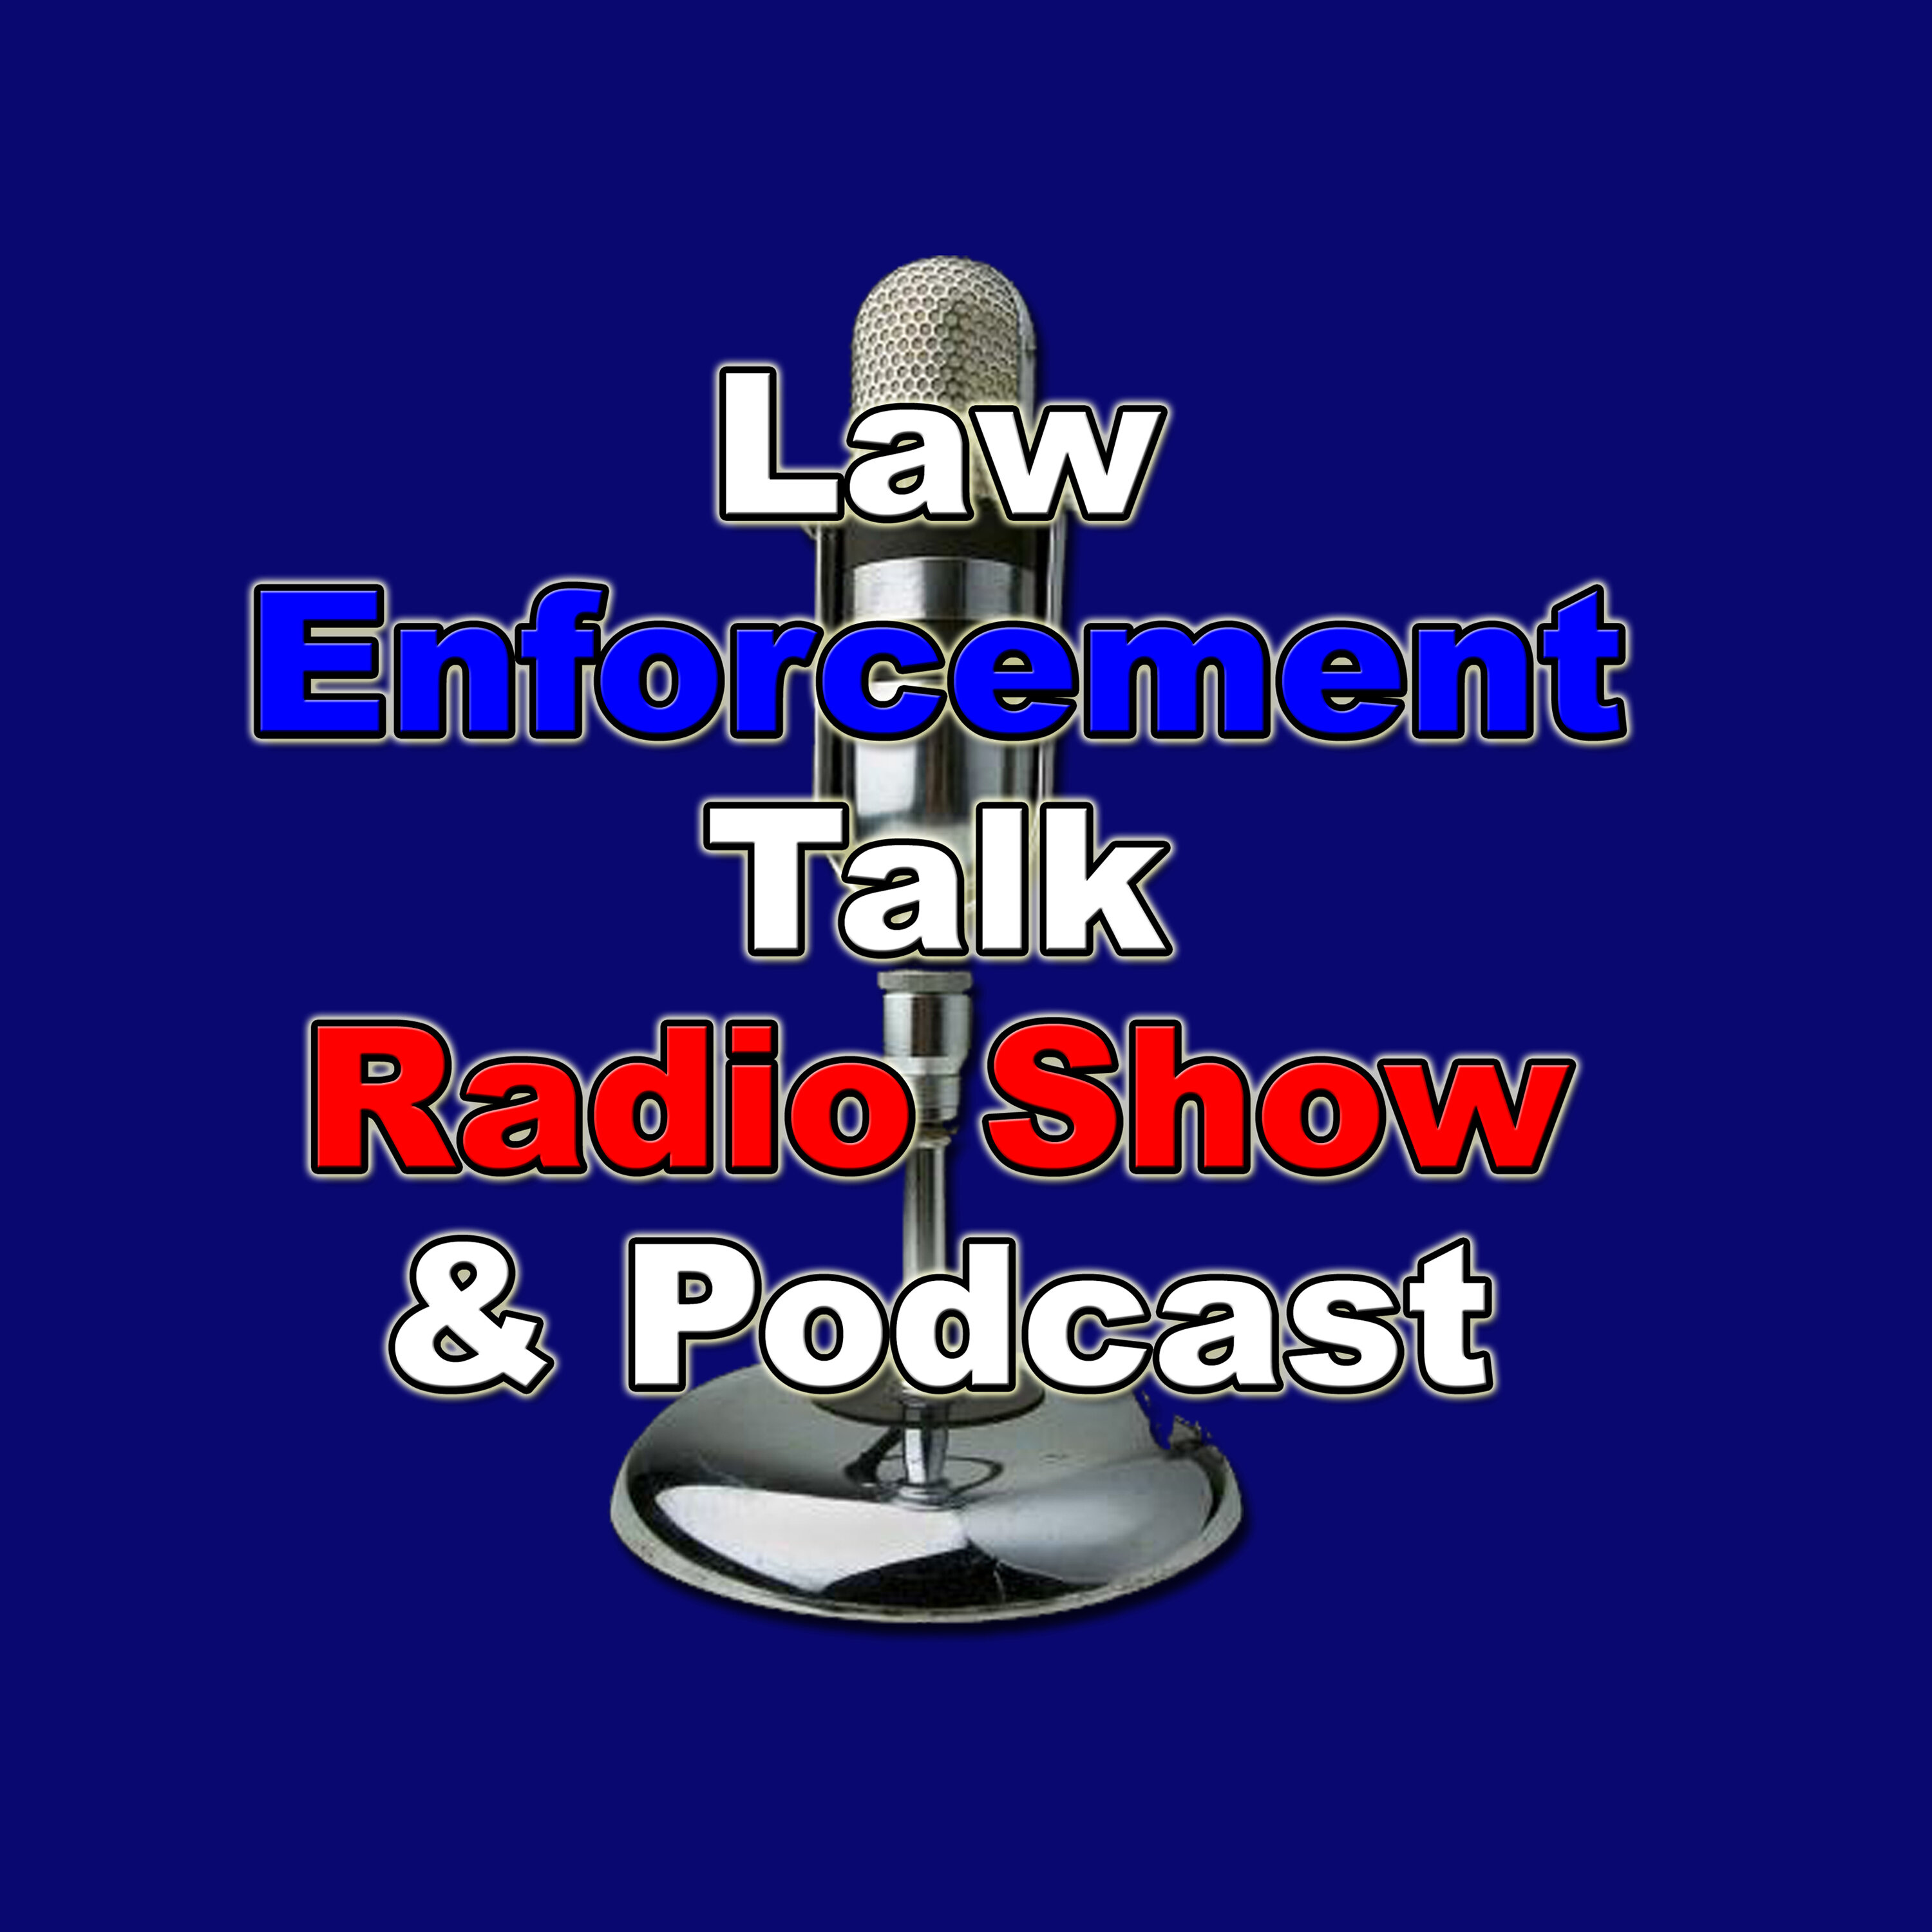 S6E43: Unspoken Cost and Threats for Jail Ministers. From Murder to Manipulation and More.